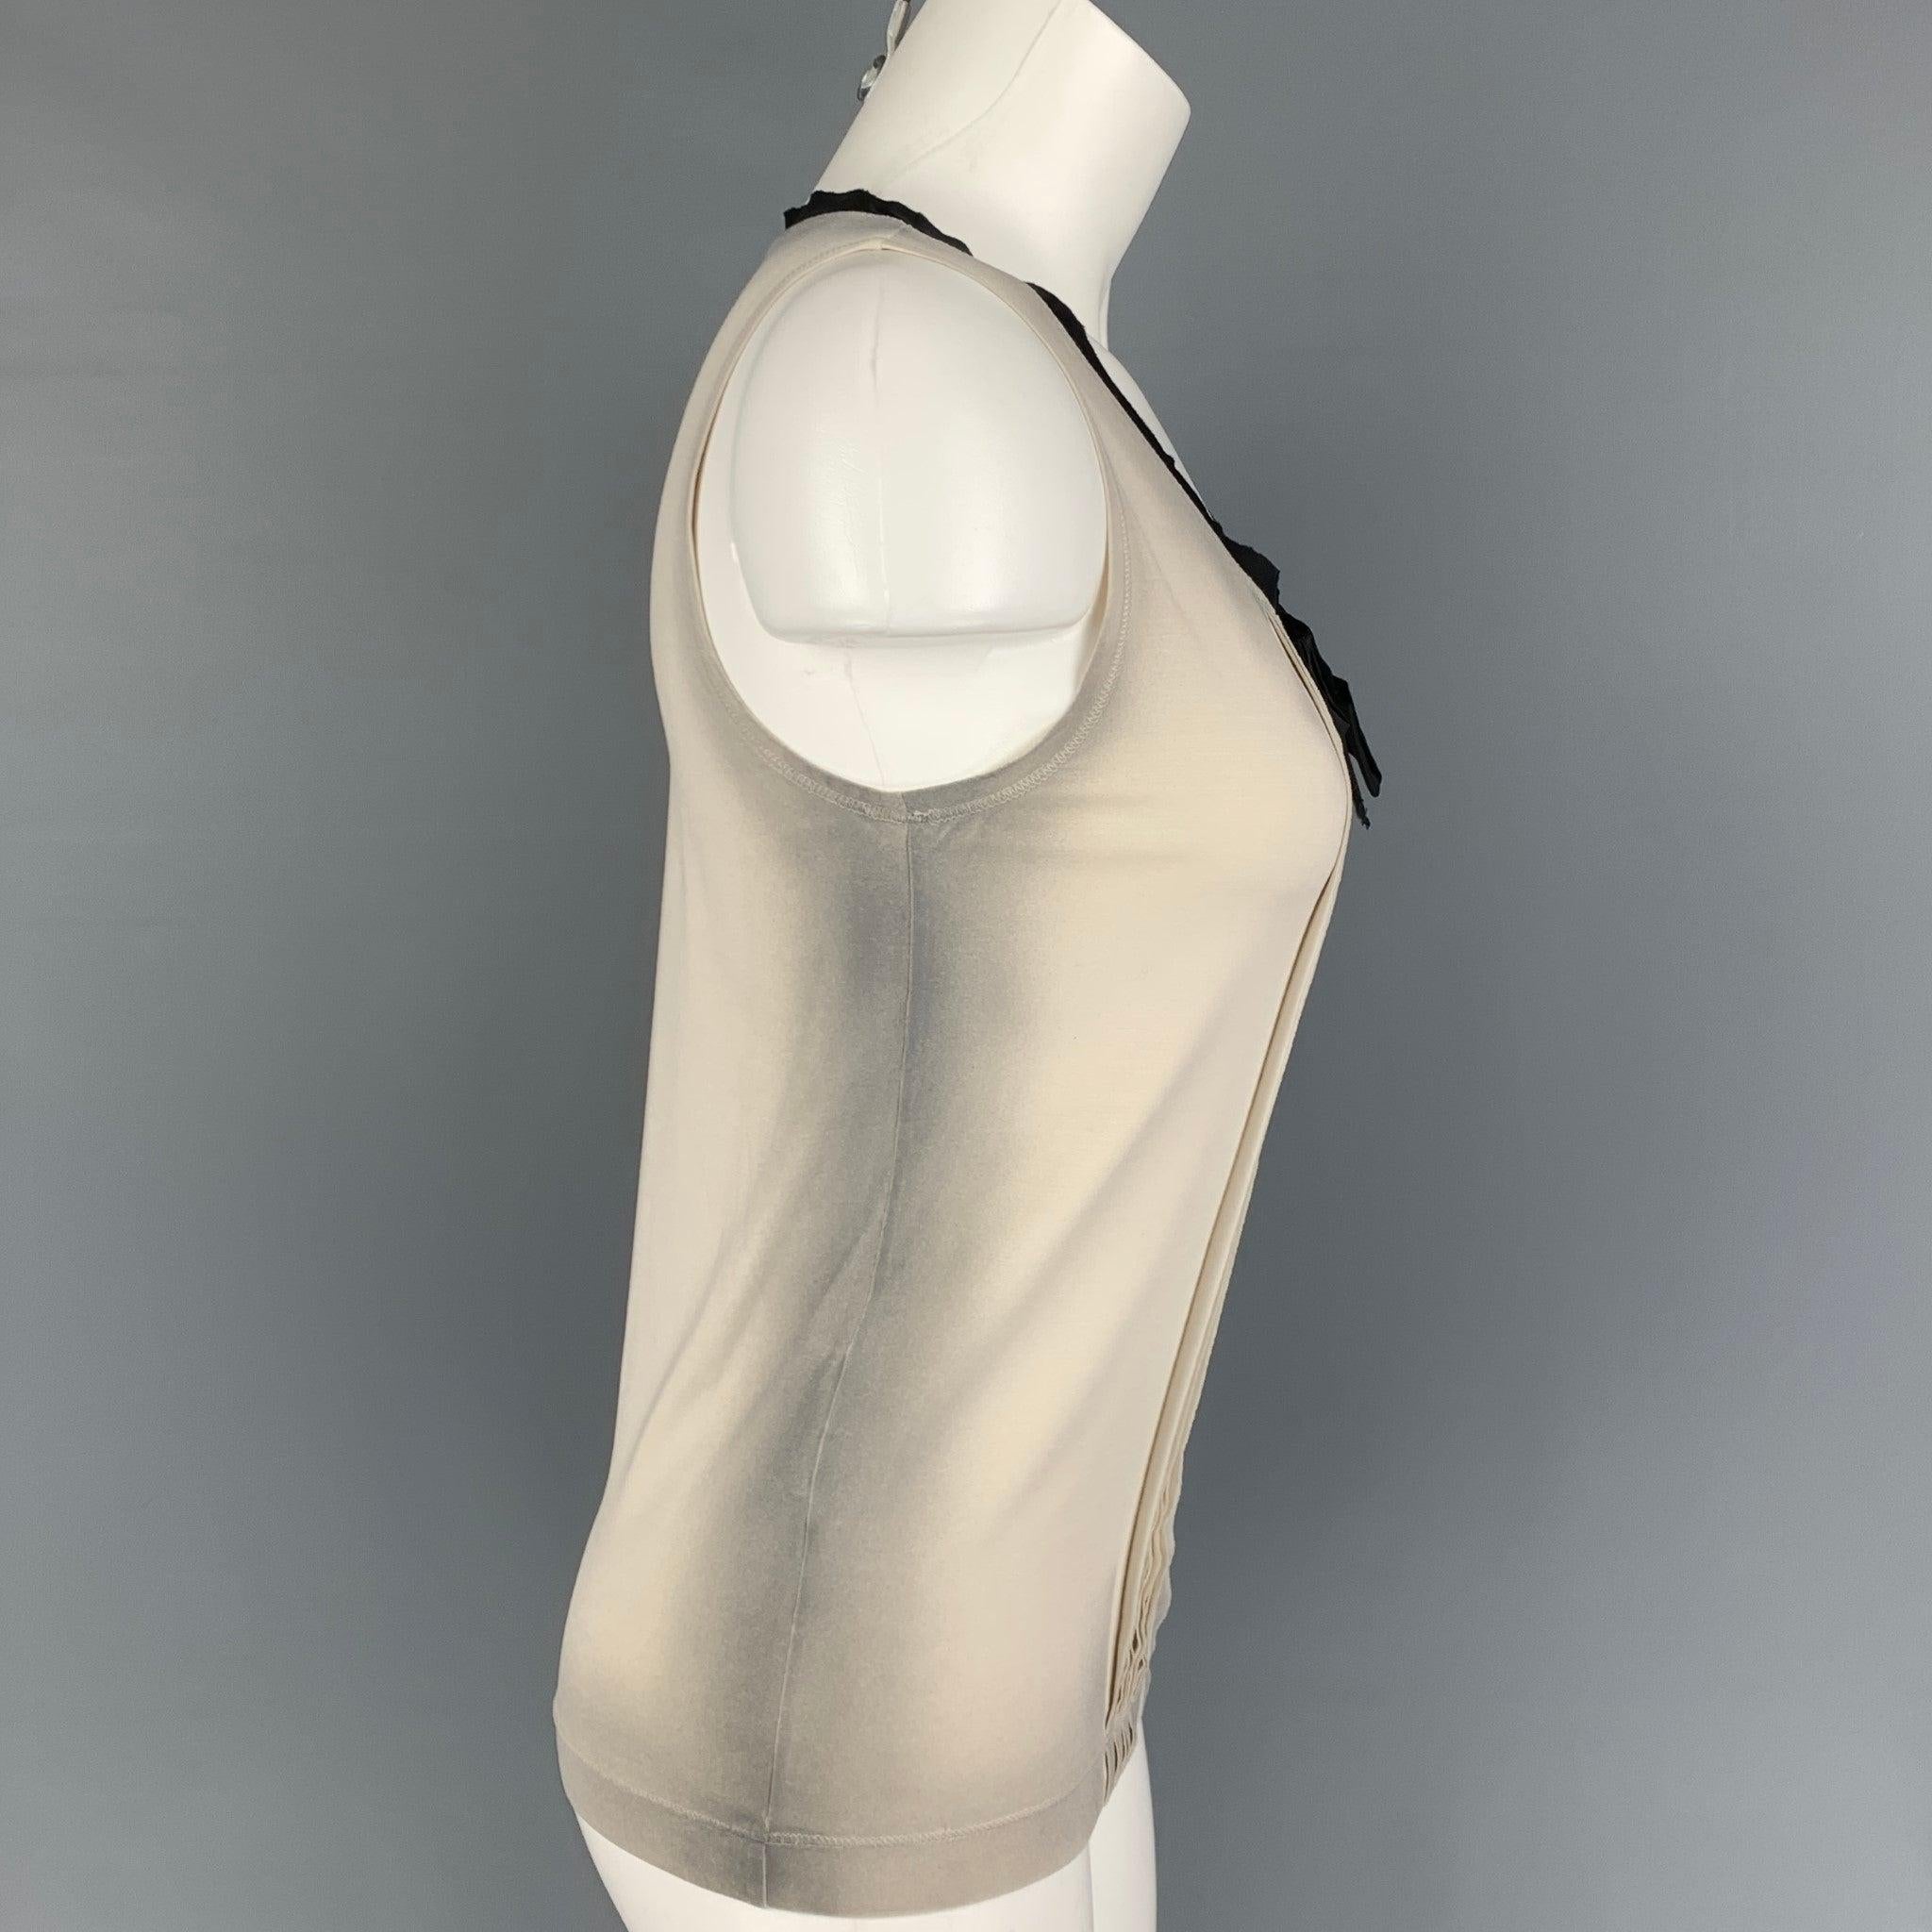 PRADA dress top comes in a beige & black ombre silk featuring a front pleated design, sleeveless, and a front bow detail. Made in Italy.
Very Good
Pre-Owned Condition. 

Marked:   S 

Measurements: 
 
Shoulder: 12 inches  Bust: 31 inches  Length: 22